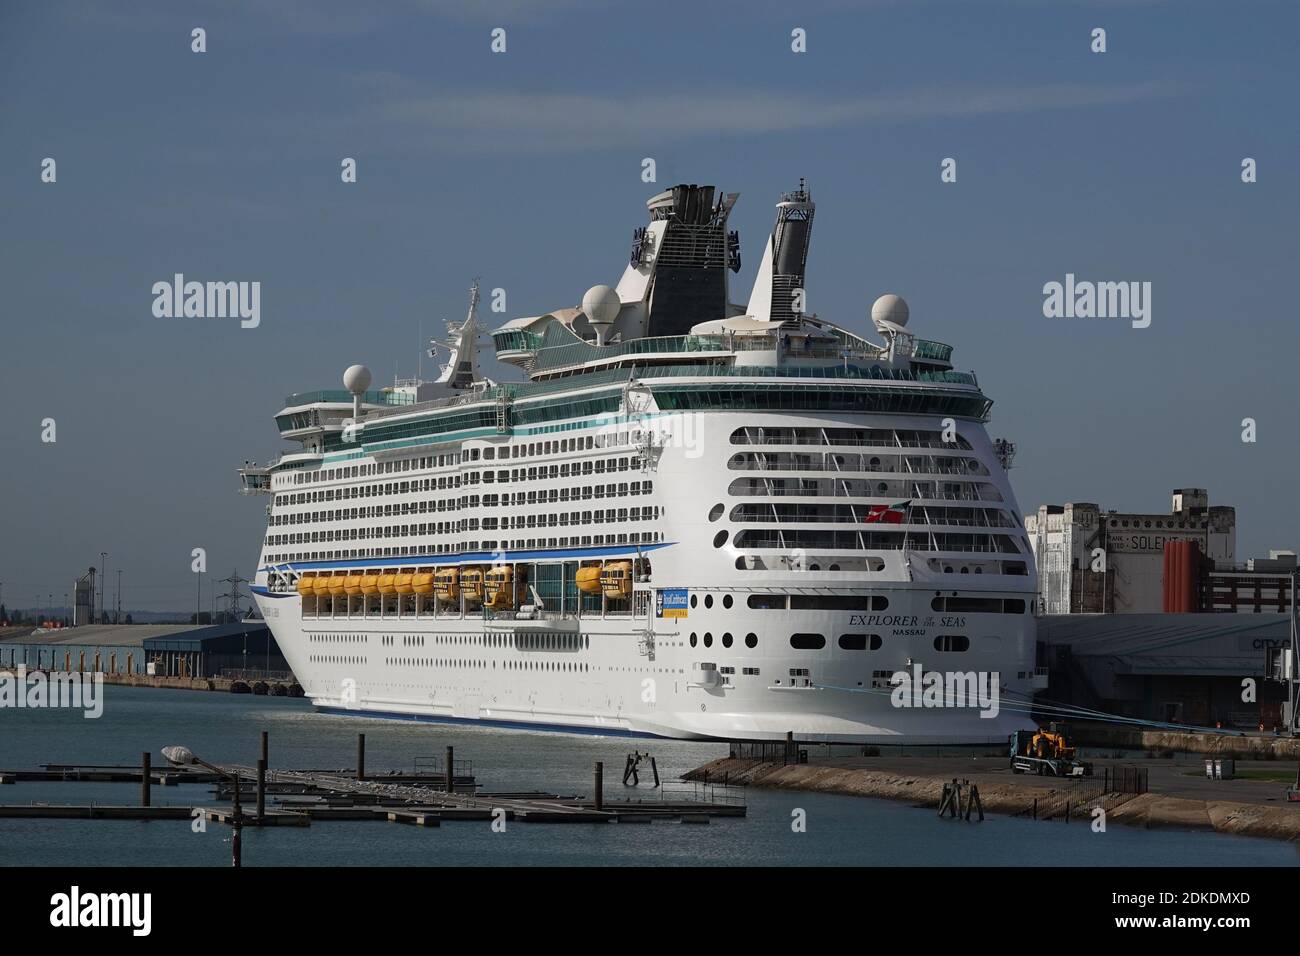 Explorer of the Seas, a Voyager-class cruise ship owned and operated by Royal Caribbean International, in dock at Southampton during the Covid-19 viru Stock Photo